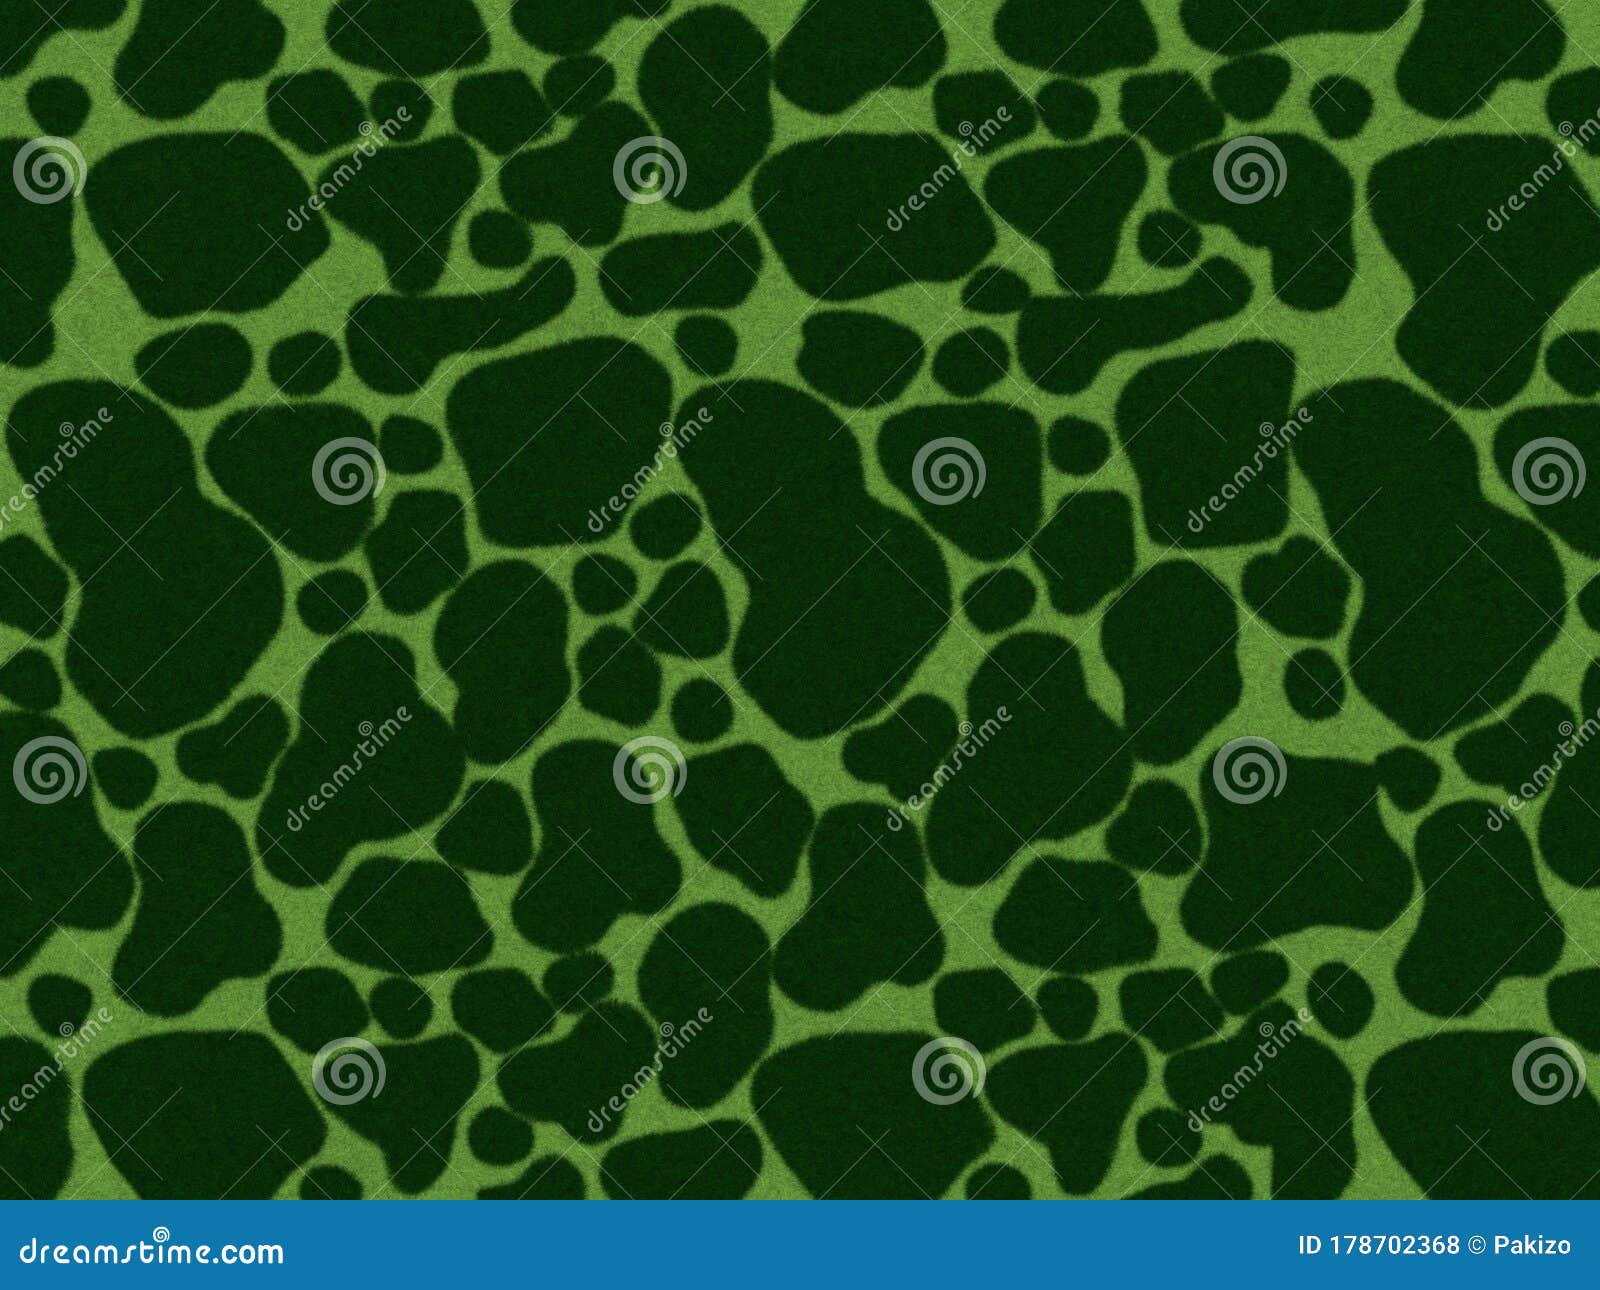 3D Tortoise or Crocodile Green Print Camouflage Texture, Carpet Animal Skin  Pattern or Background, Black Green Leather Fur Theme, Stock Illustration -  Illustration of background, abstract: 178702368